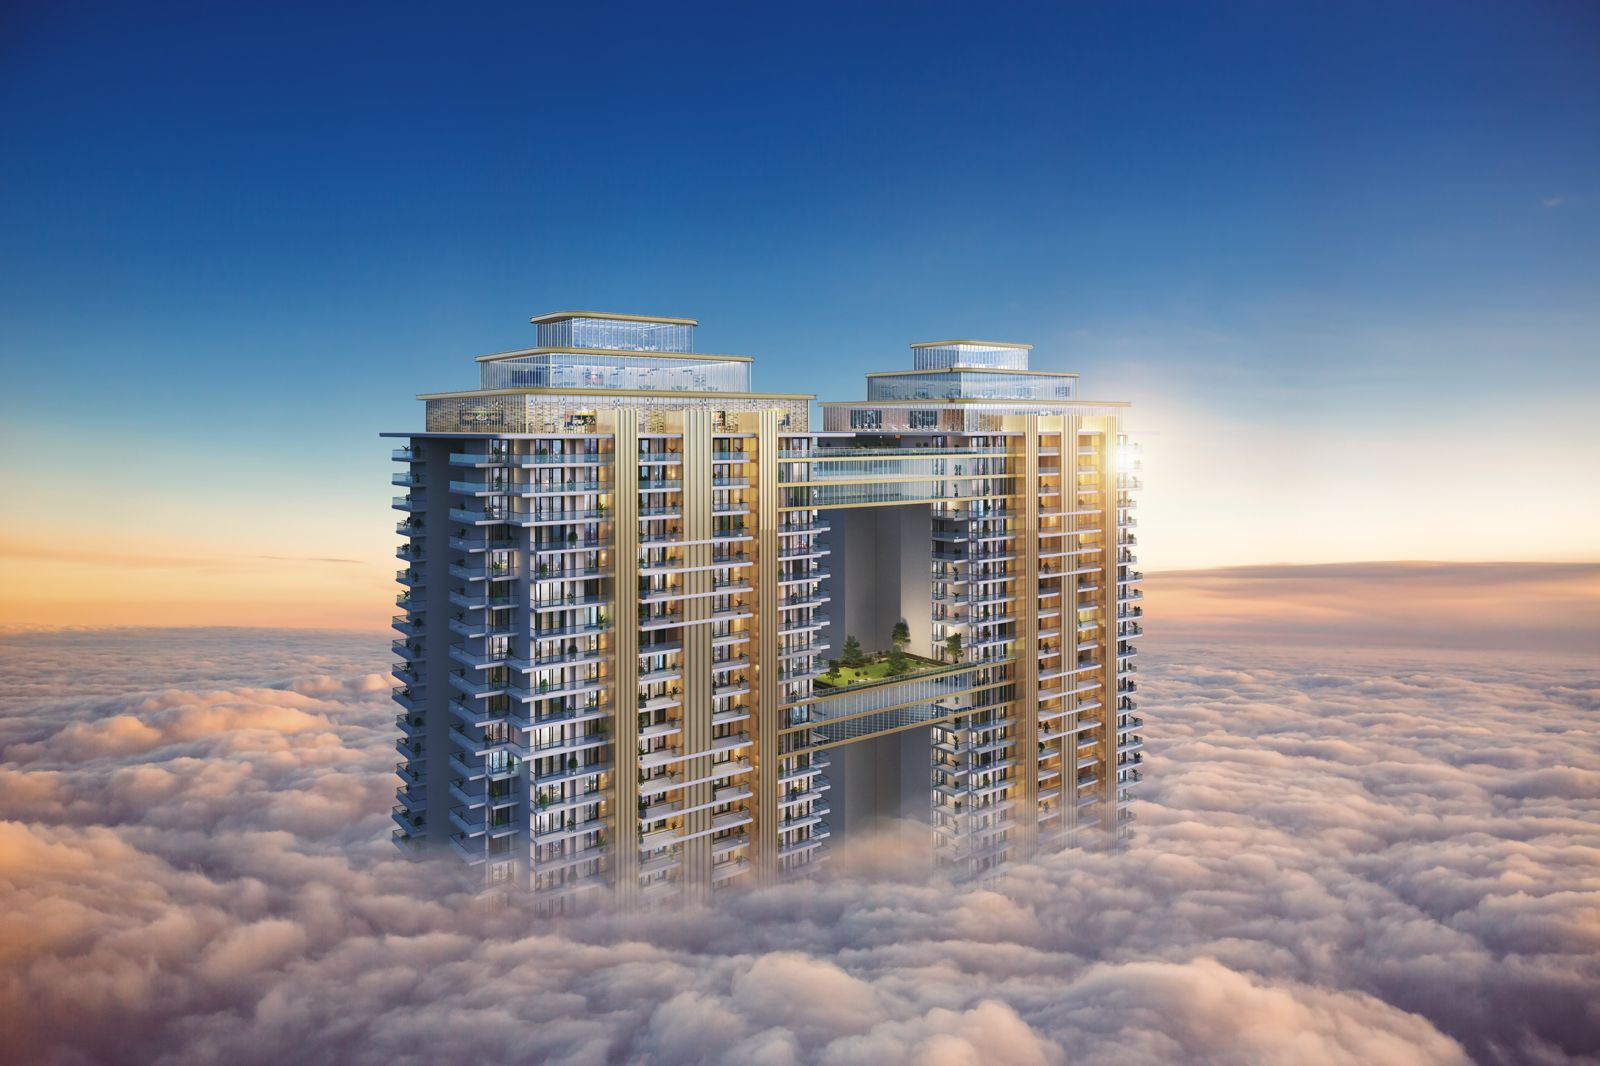 Super Luxurious Apartments In Marbella Twin Towers, New Chandigarh